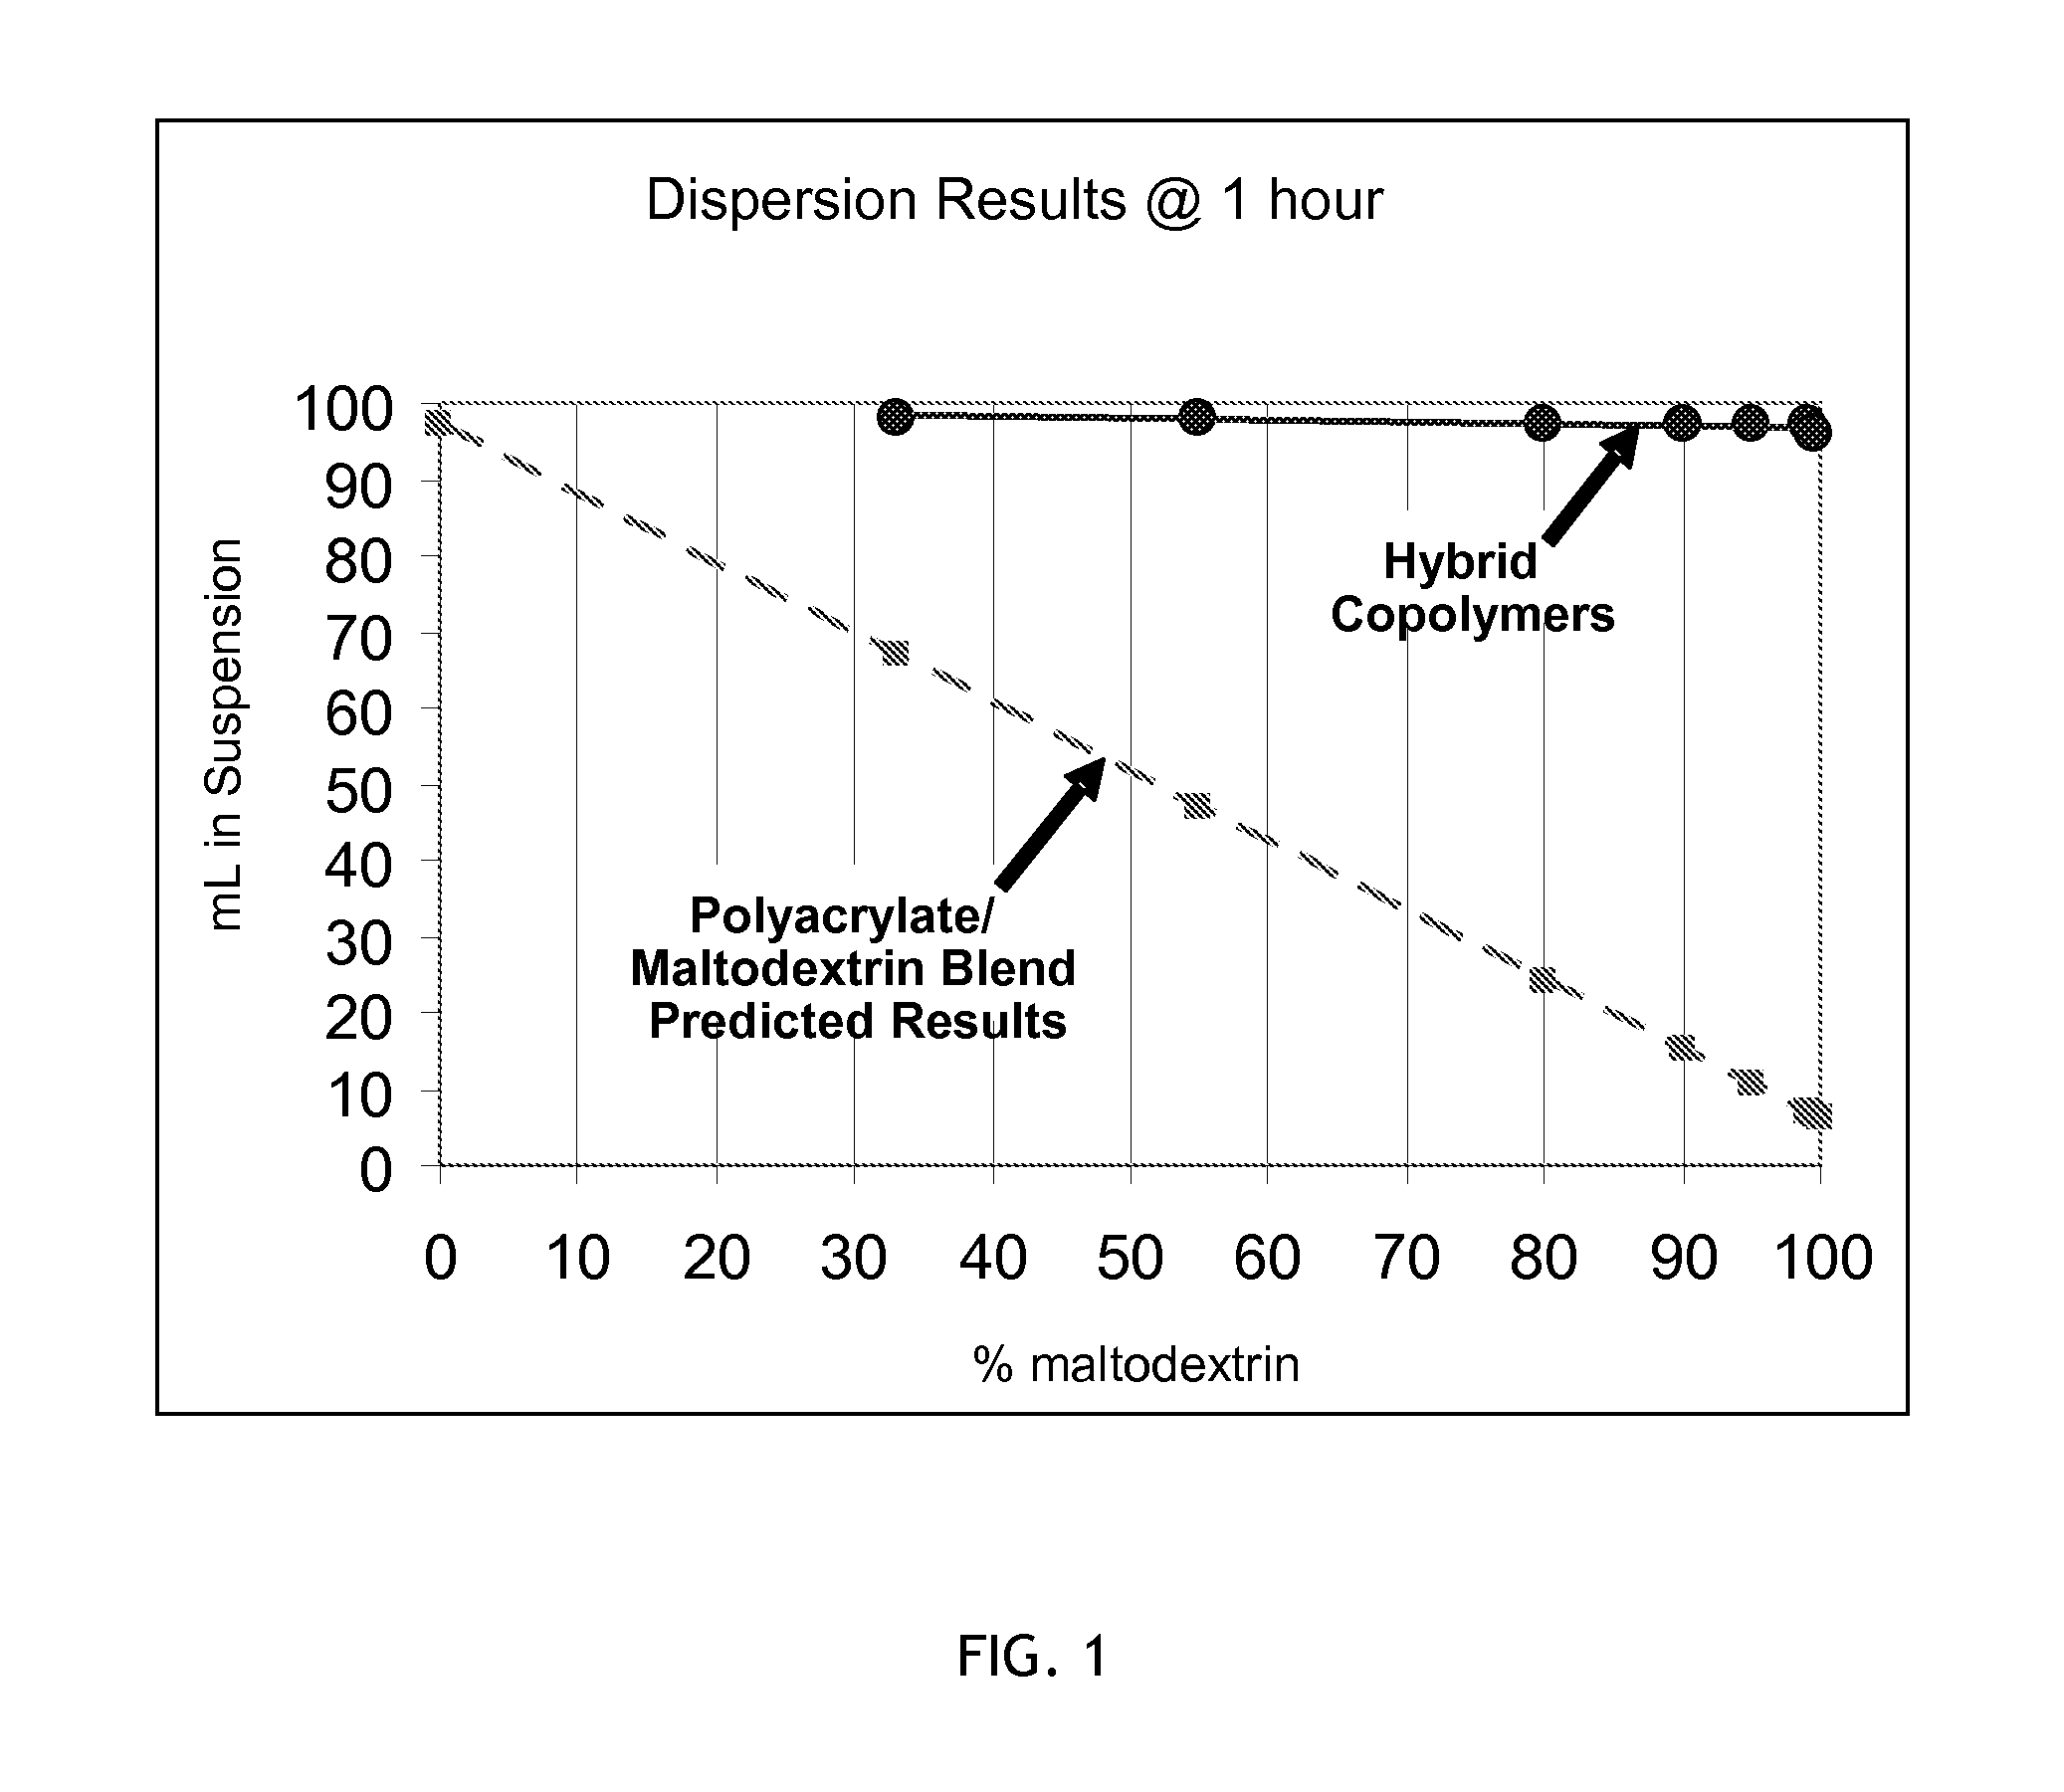 Hybrid copolymer compositions